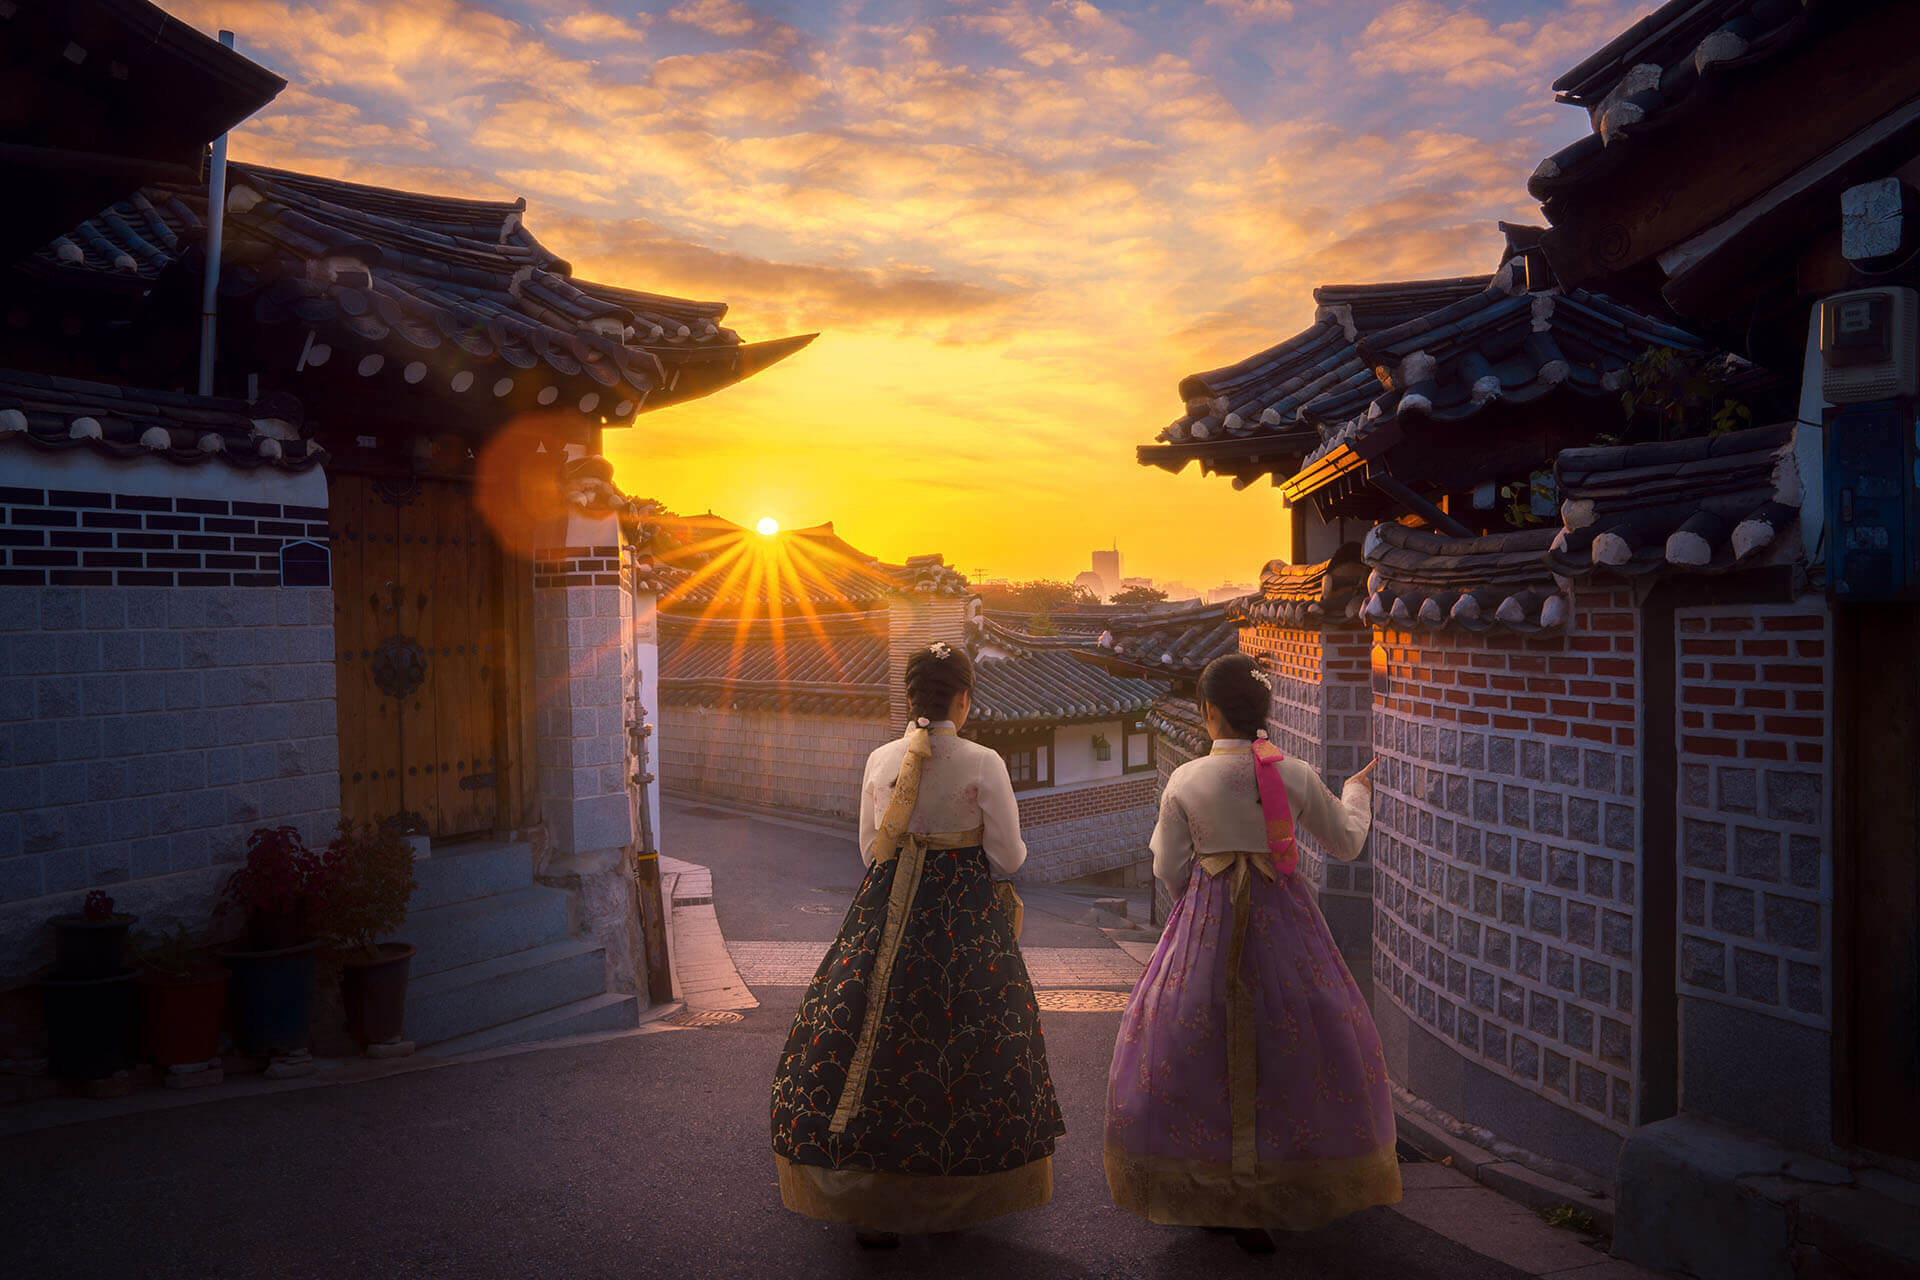 South Korea: Expansion of Visa-Free Applications to More Travelers